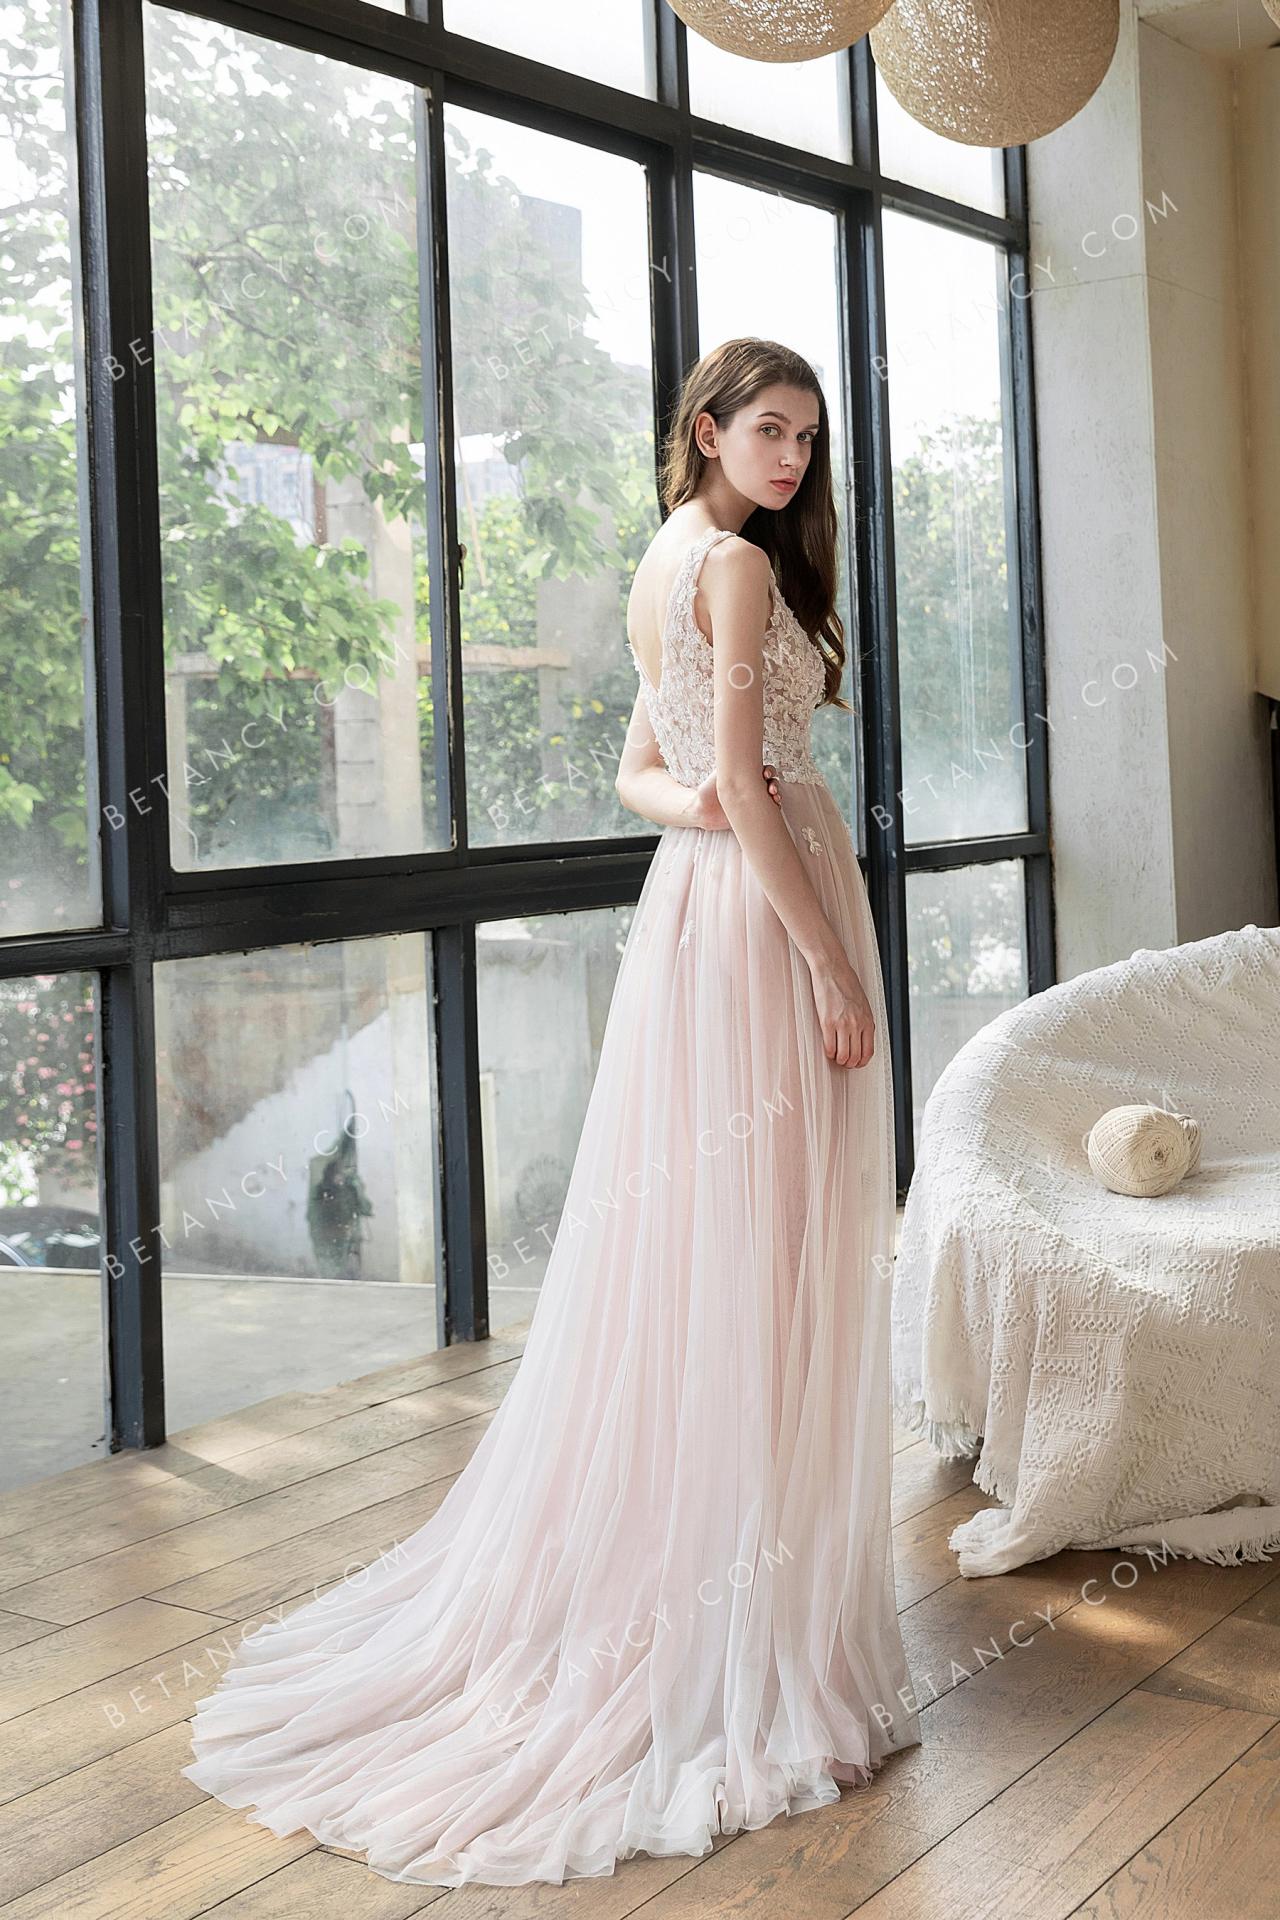 Sexy romantic and ethereal transparent tulle wedding dress 3